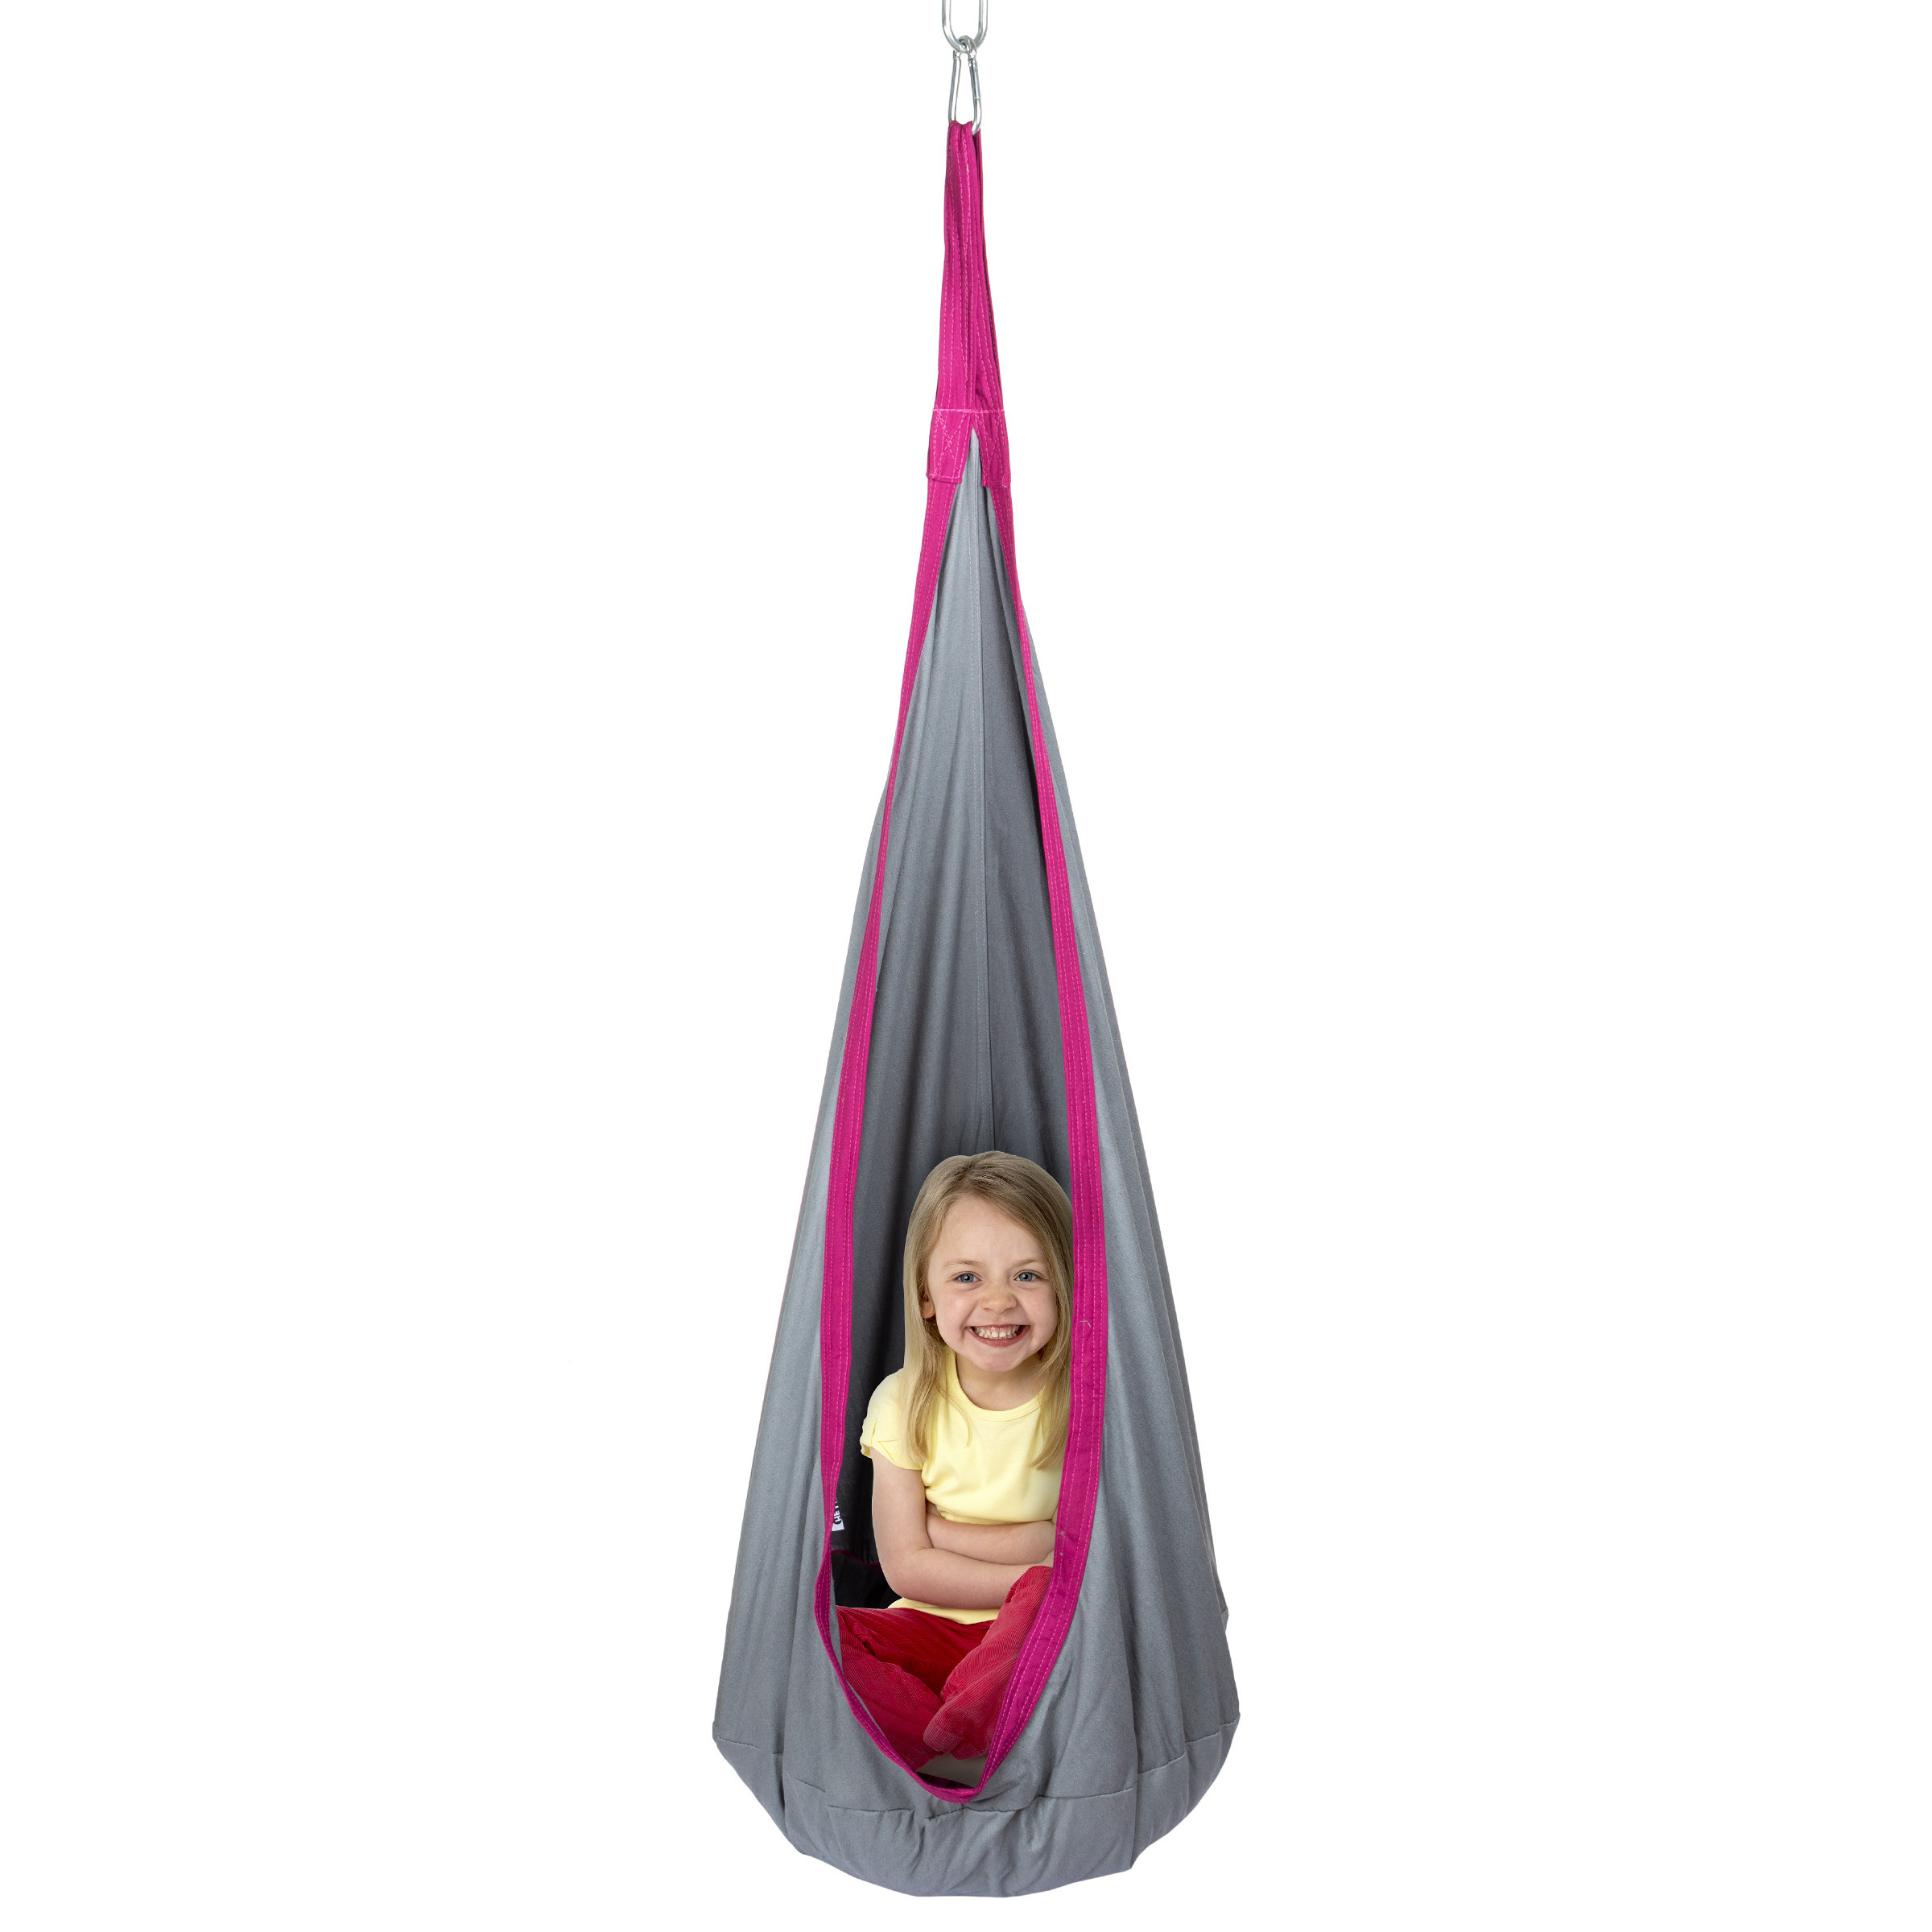 Kids Hanging Swing
 Hanging Swing Seat for Children Sturdy Padded Cocoon